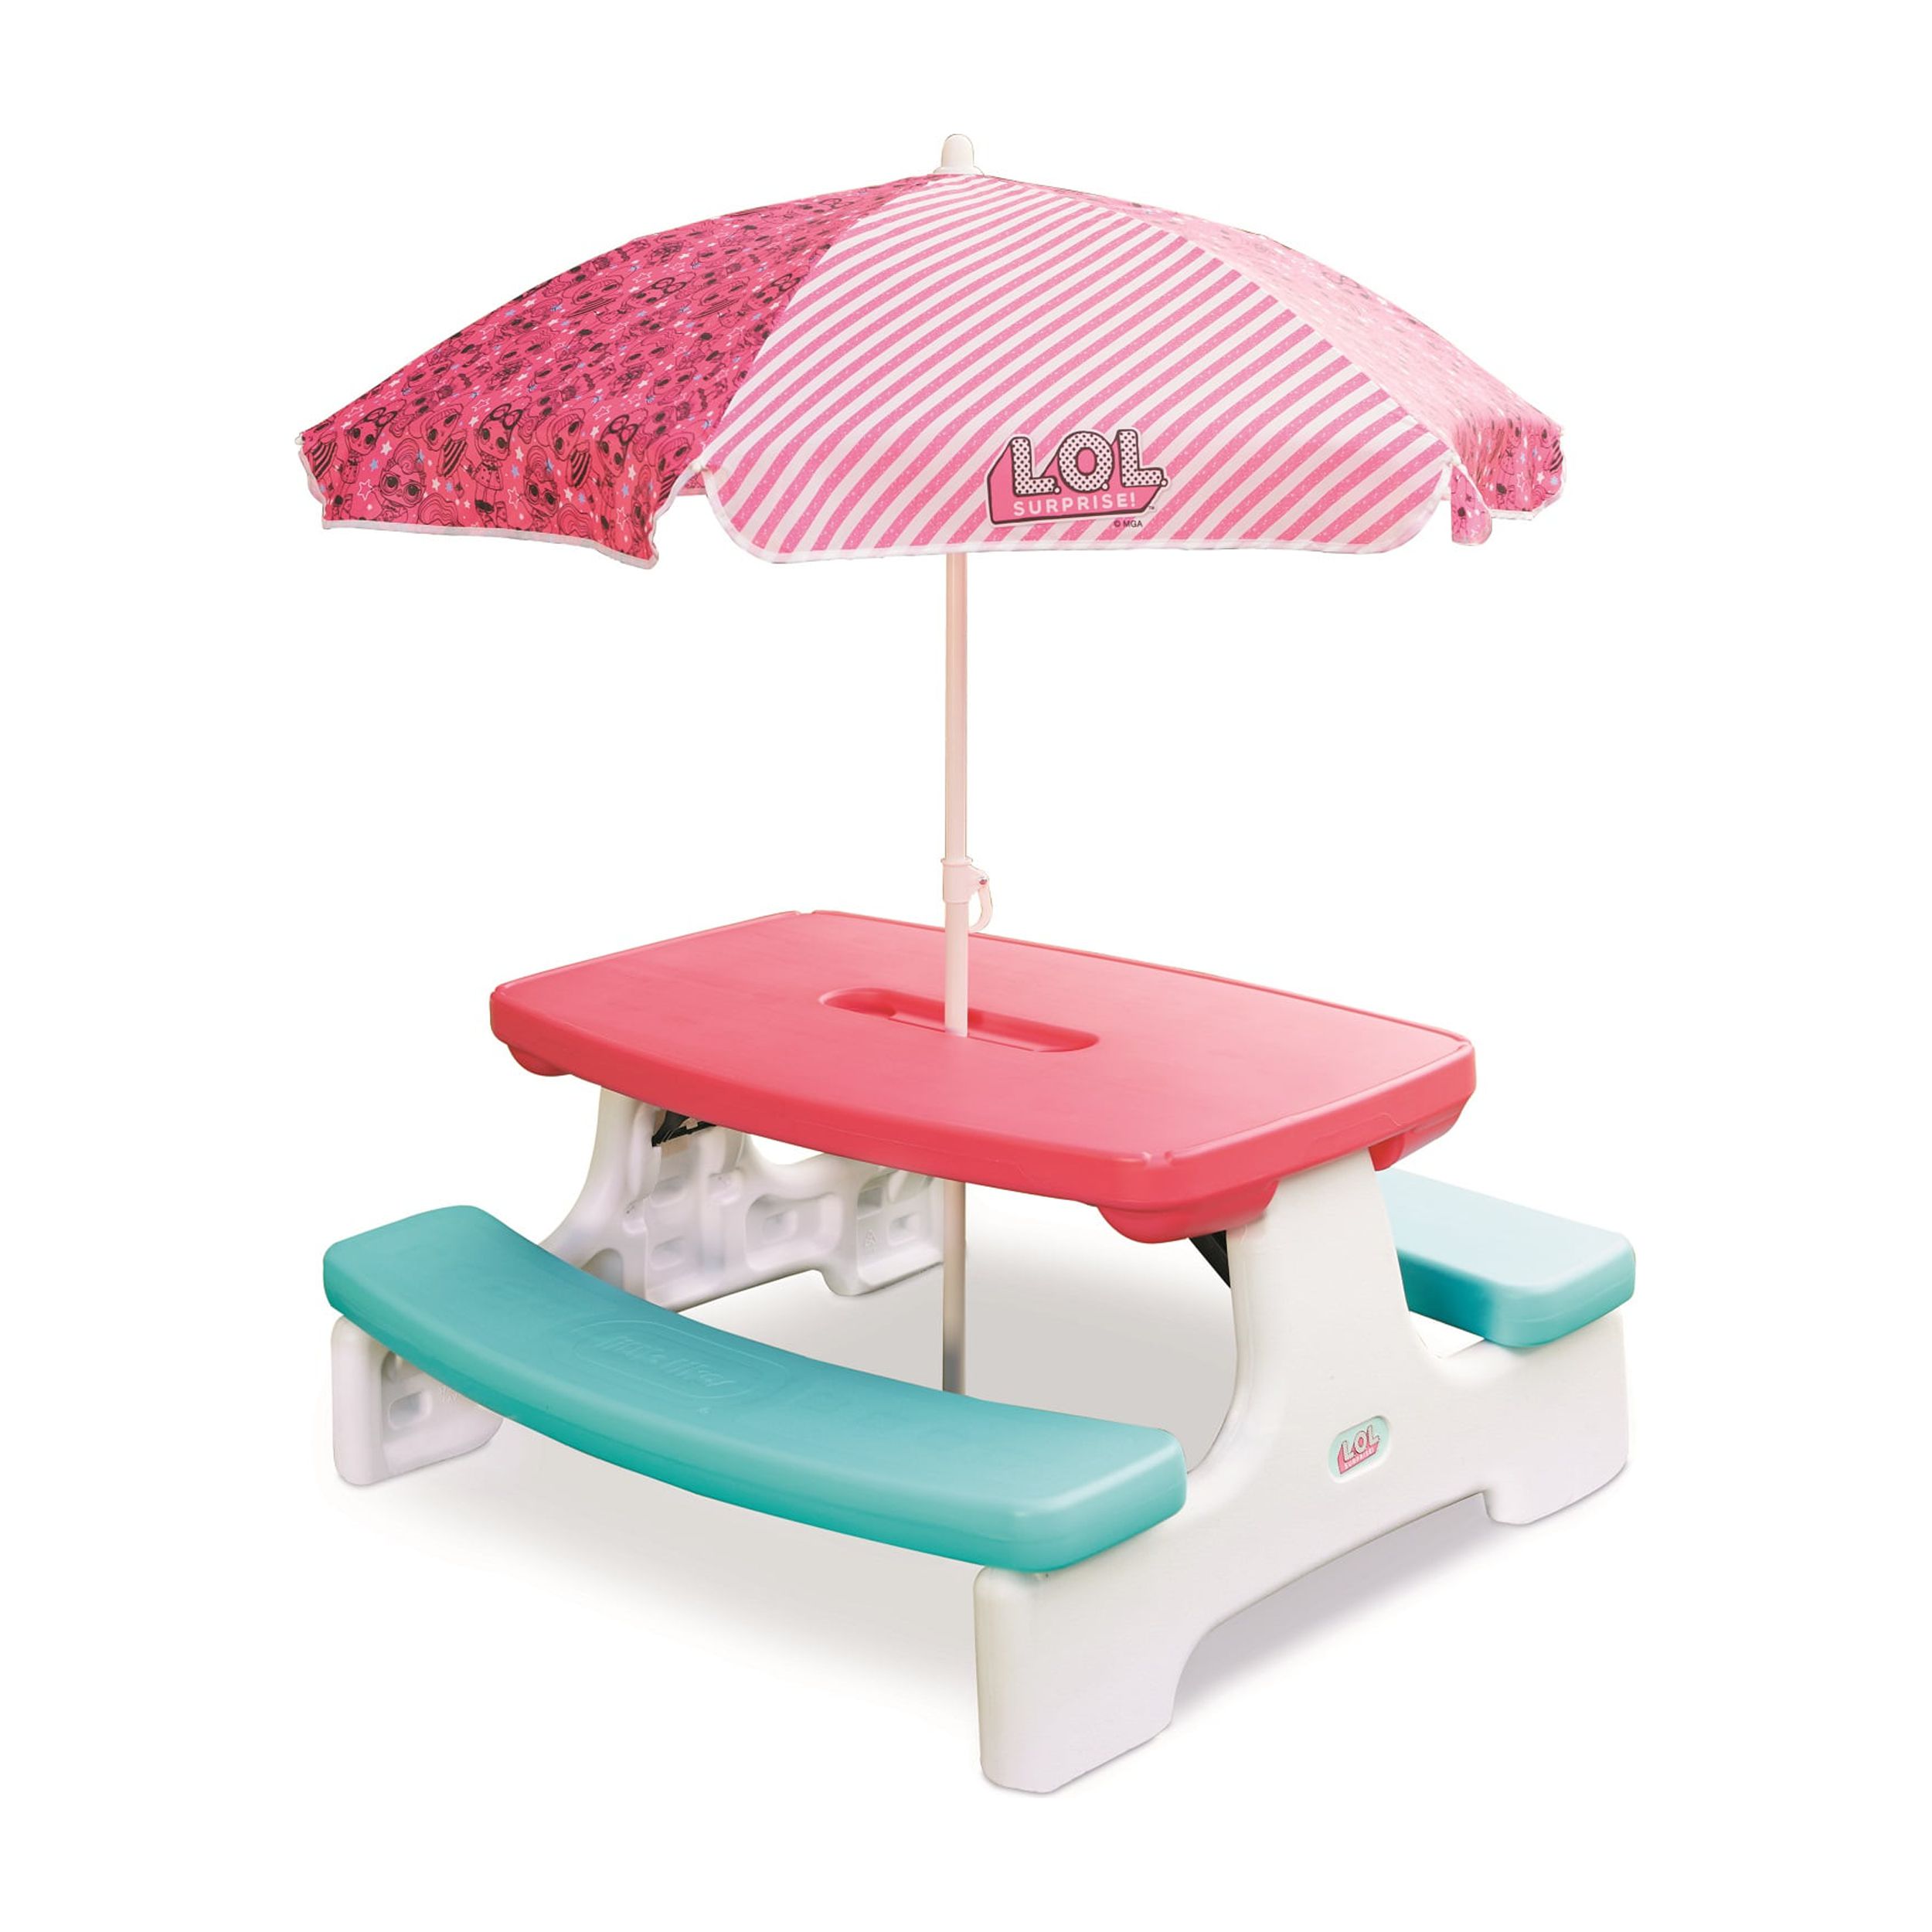 L.O.L Surprise! Birthday Party Kids Picnic Table with Umbrella, Great Gift for Kids Ages 4, 5, 6+ - image 1 of 7